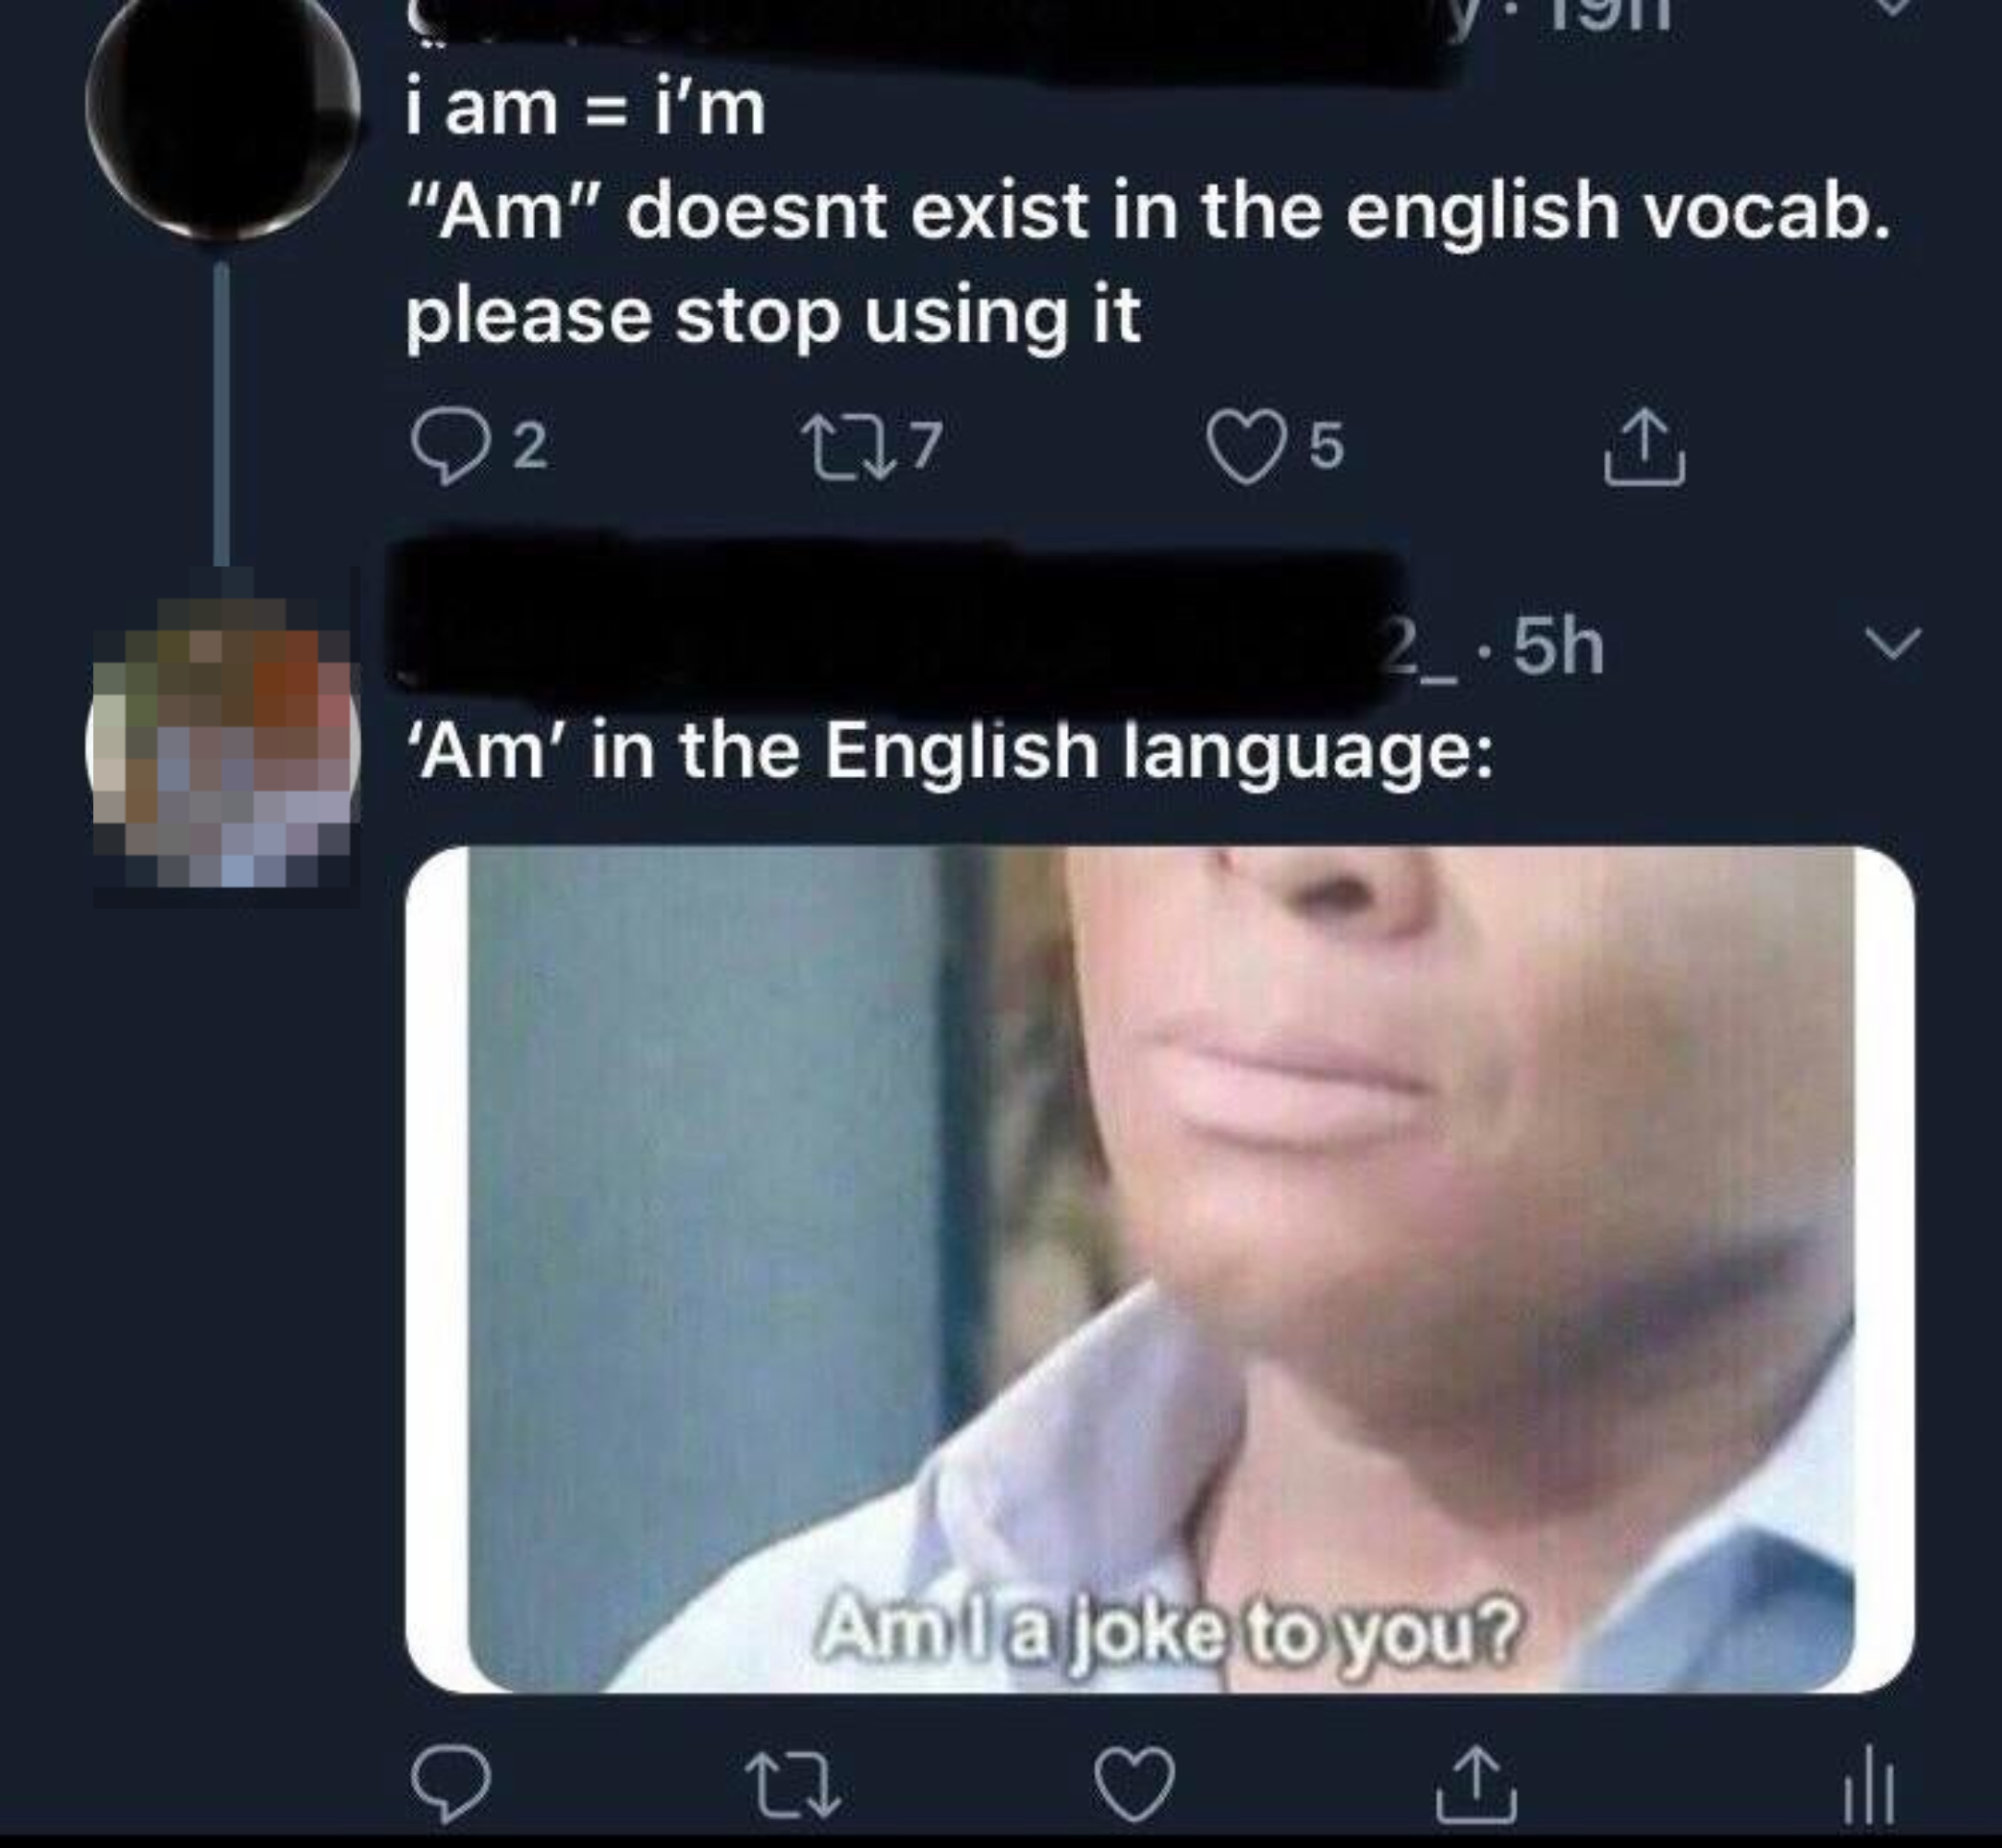 &quot;I am = I&#x27;m; Am doesn&#x27;t exist in the English vocabulary, please stop using it&quot; and a reaction image of a perplexed man captioned, &quot;Am I a joke to you?&quot;